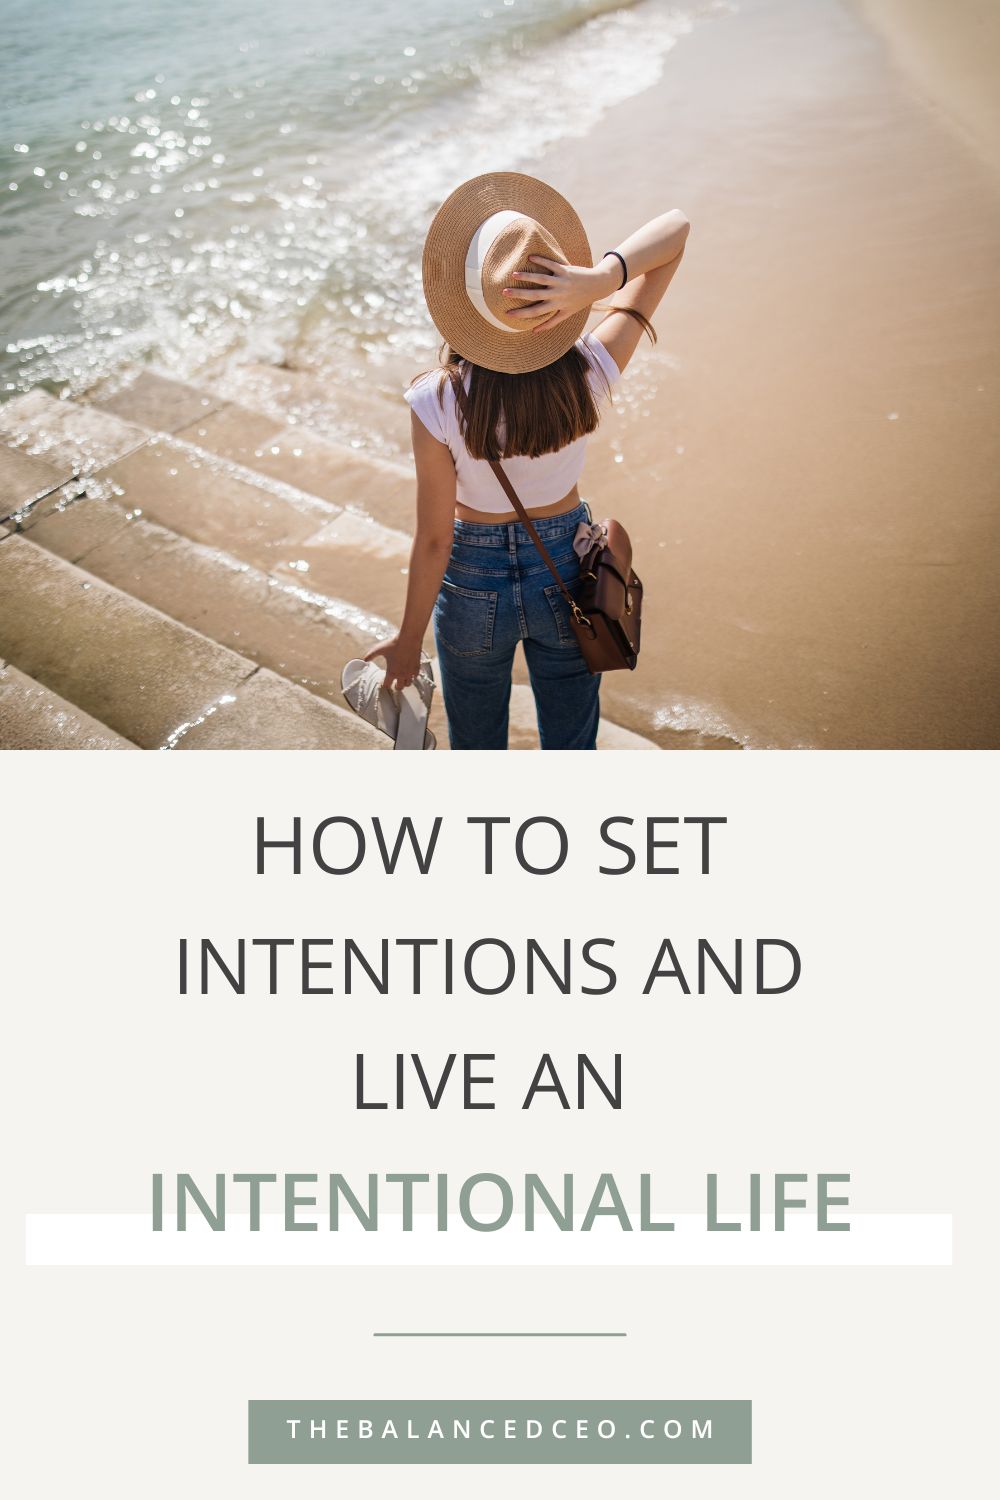 How to Set Intentions and Live an Intentional Life